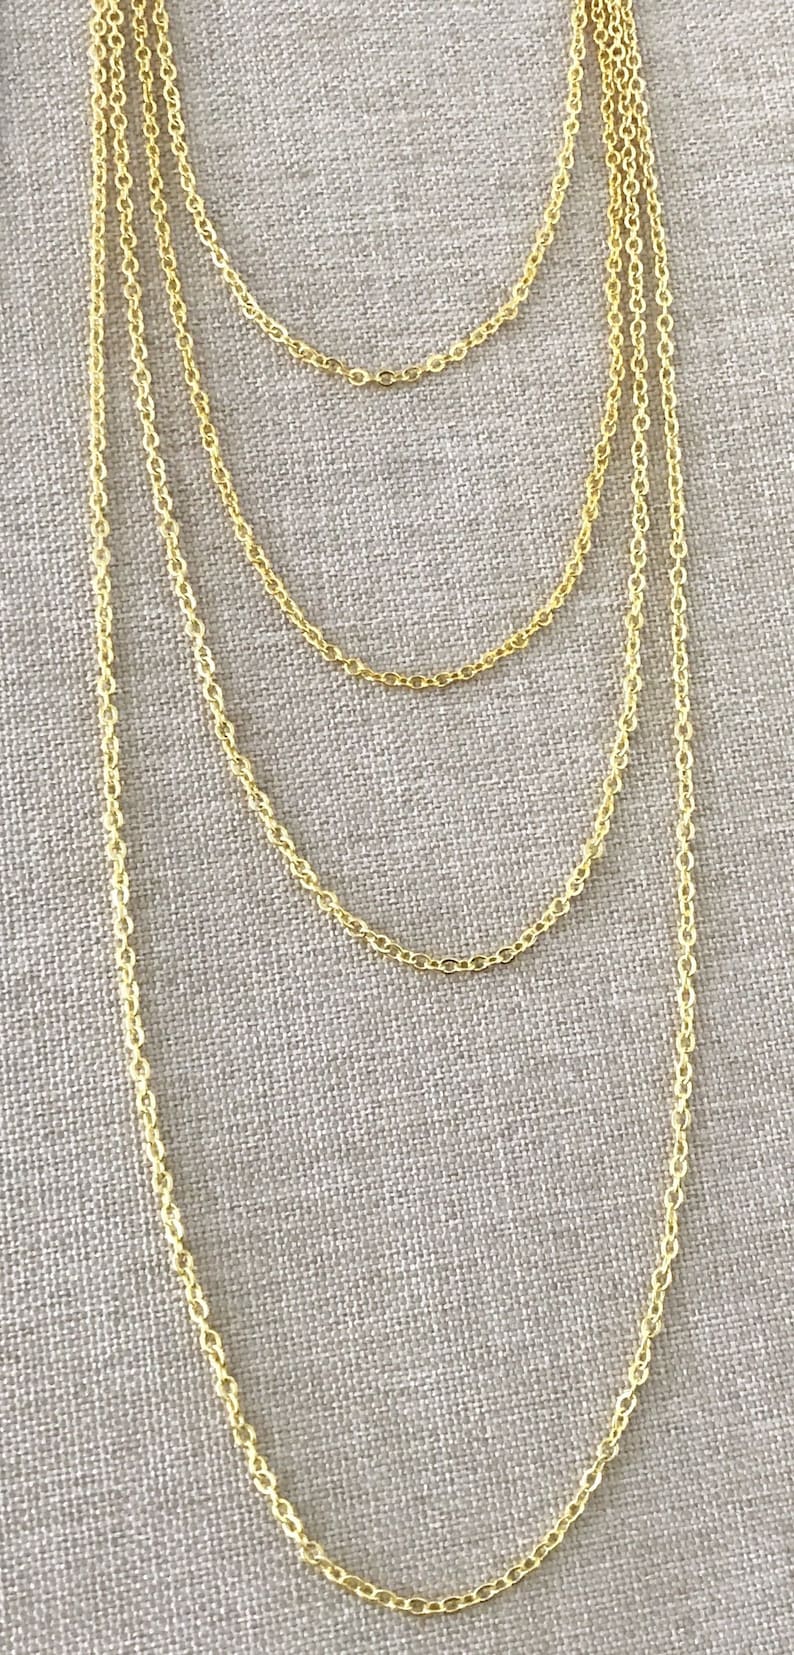 Bundle 18 18KT Yellow Gold Filled Chain Dainty Fine 18 18 Inch Necklace Lobster Claw Clasp 18 Karat KT YGF Cable Chain image 5